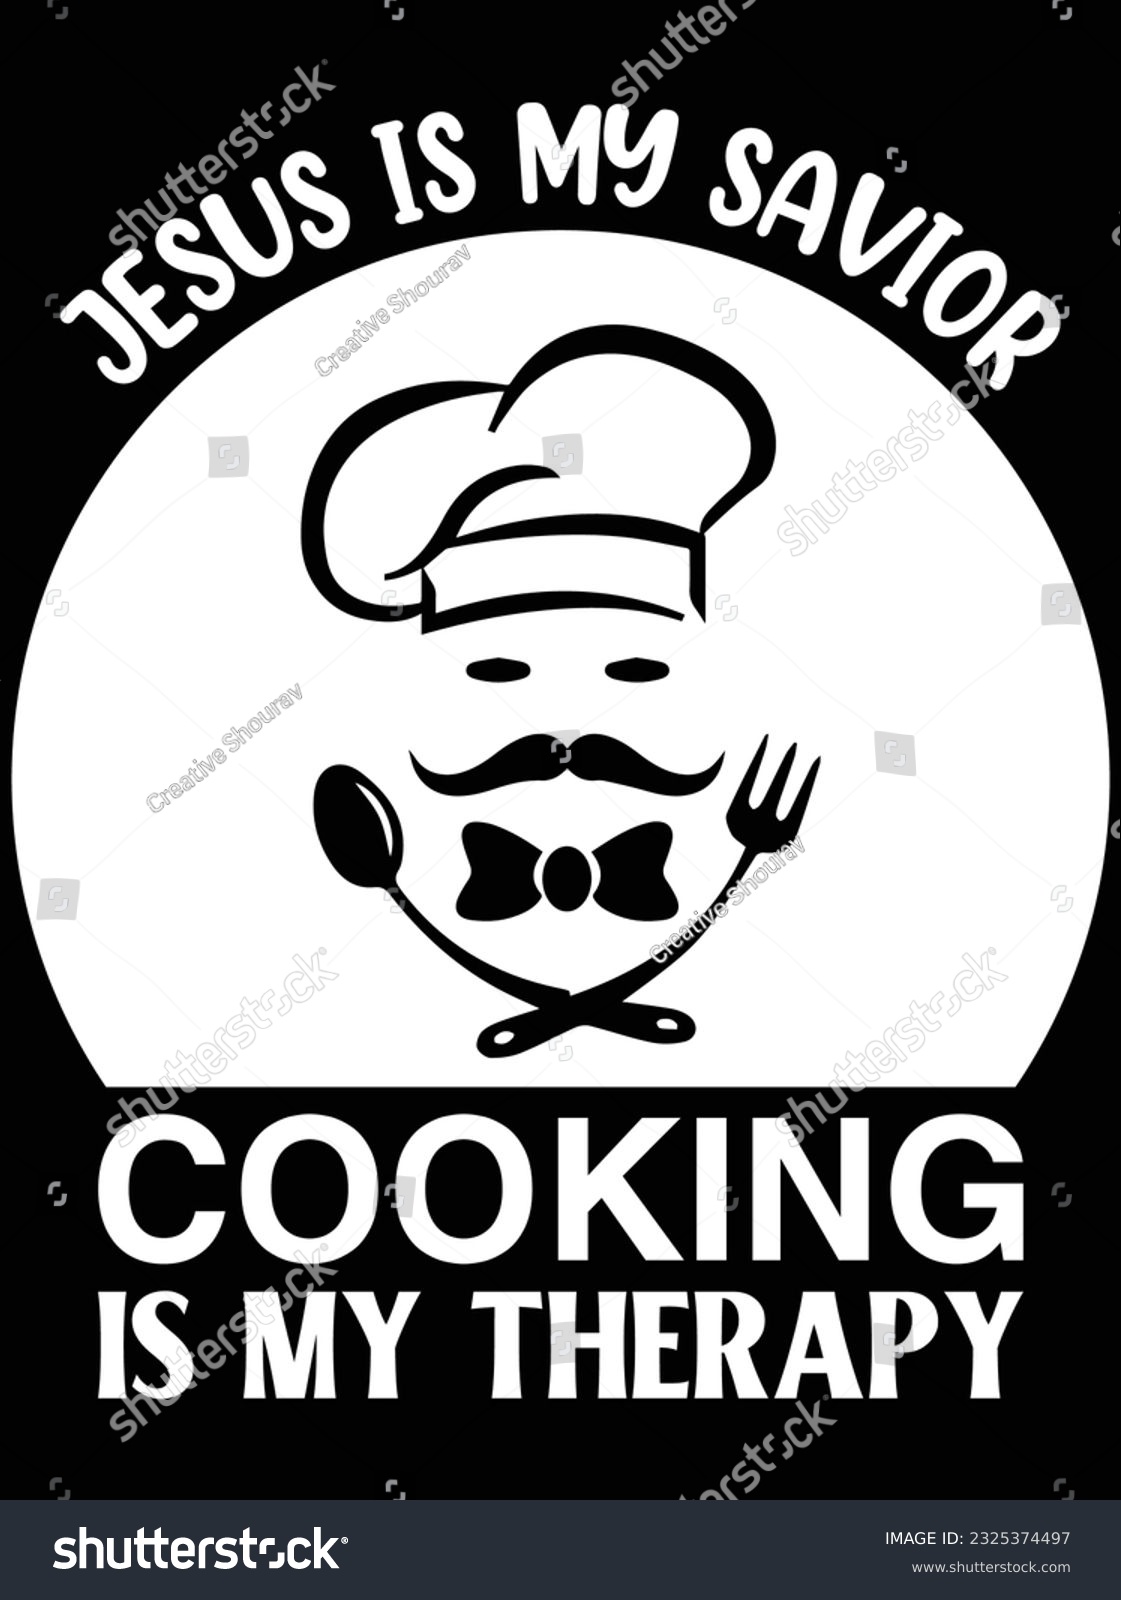 SVG of Jesus is my savior cooking is my therapy vector art design, eps file. design file for t-shirt. SVG, EPS cuttable design file svg